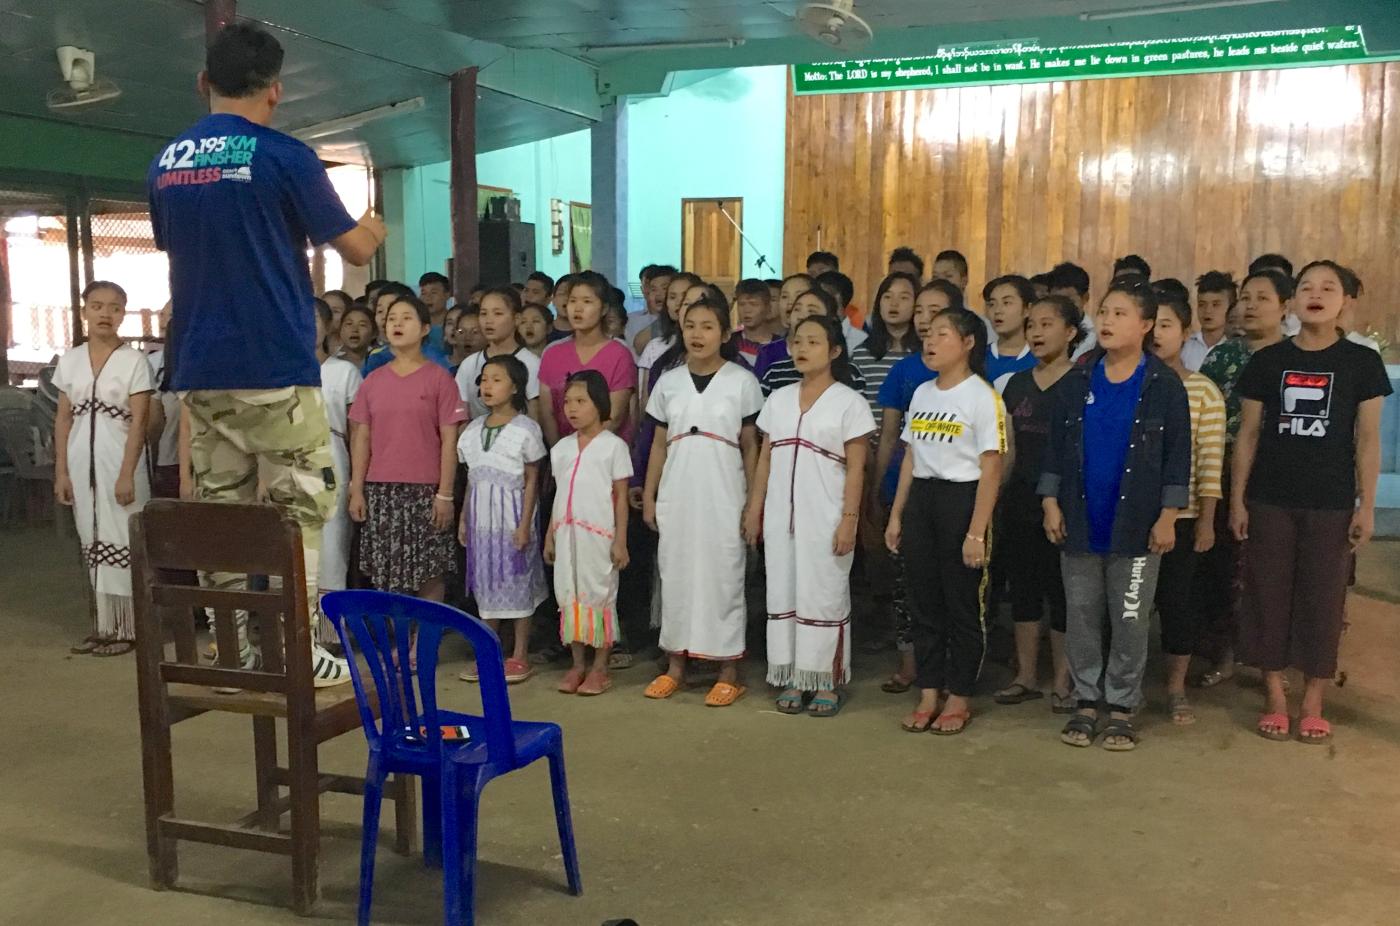 Youth choir singing at Mae La refugee camp in Thailand